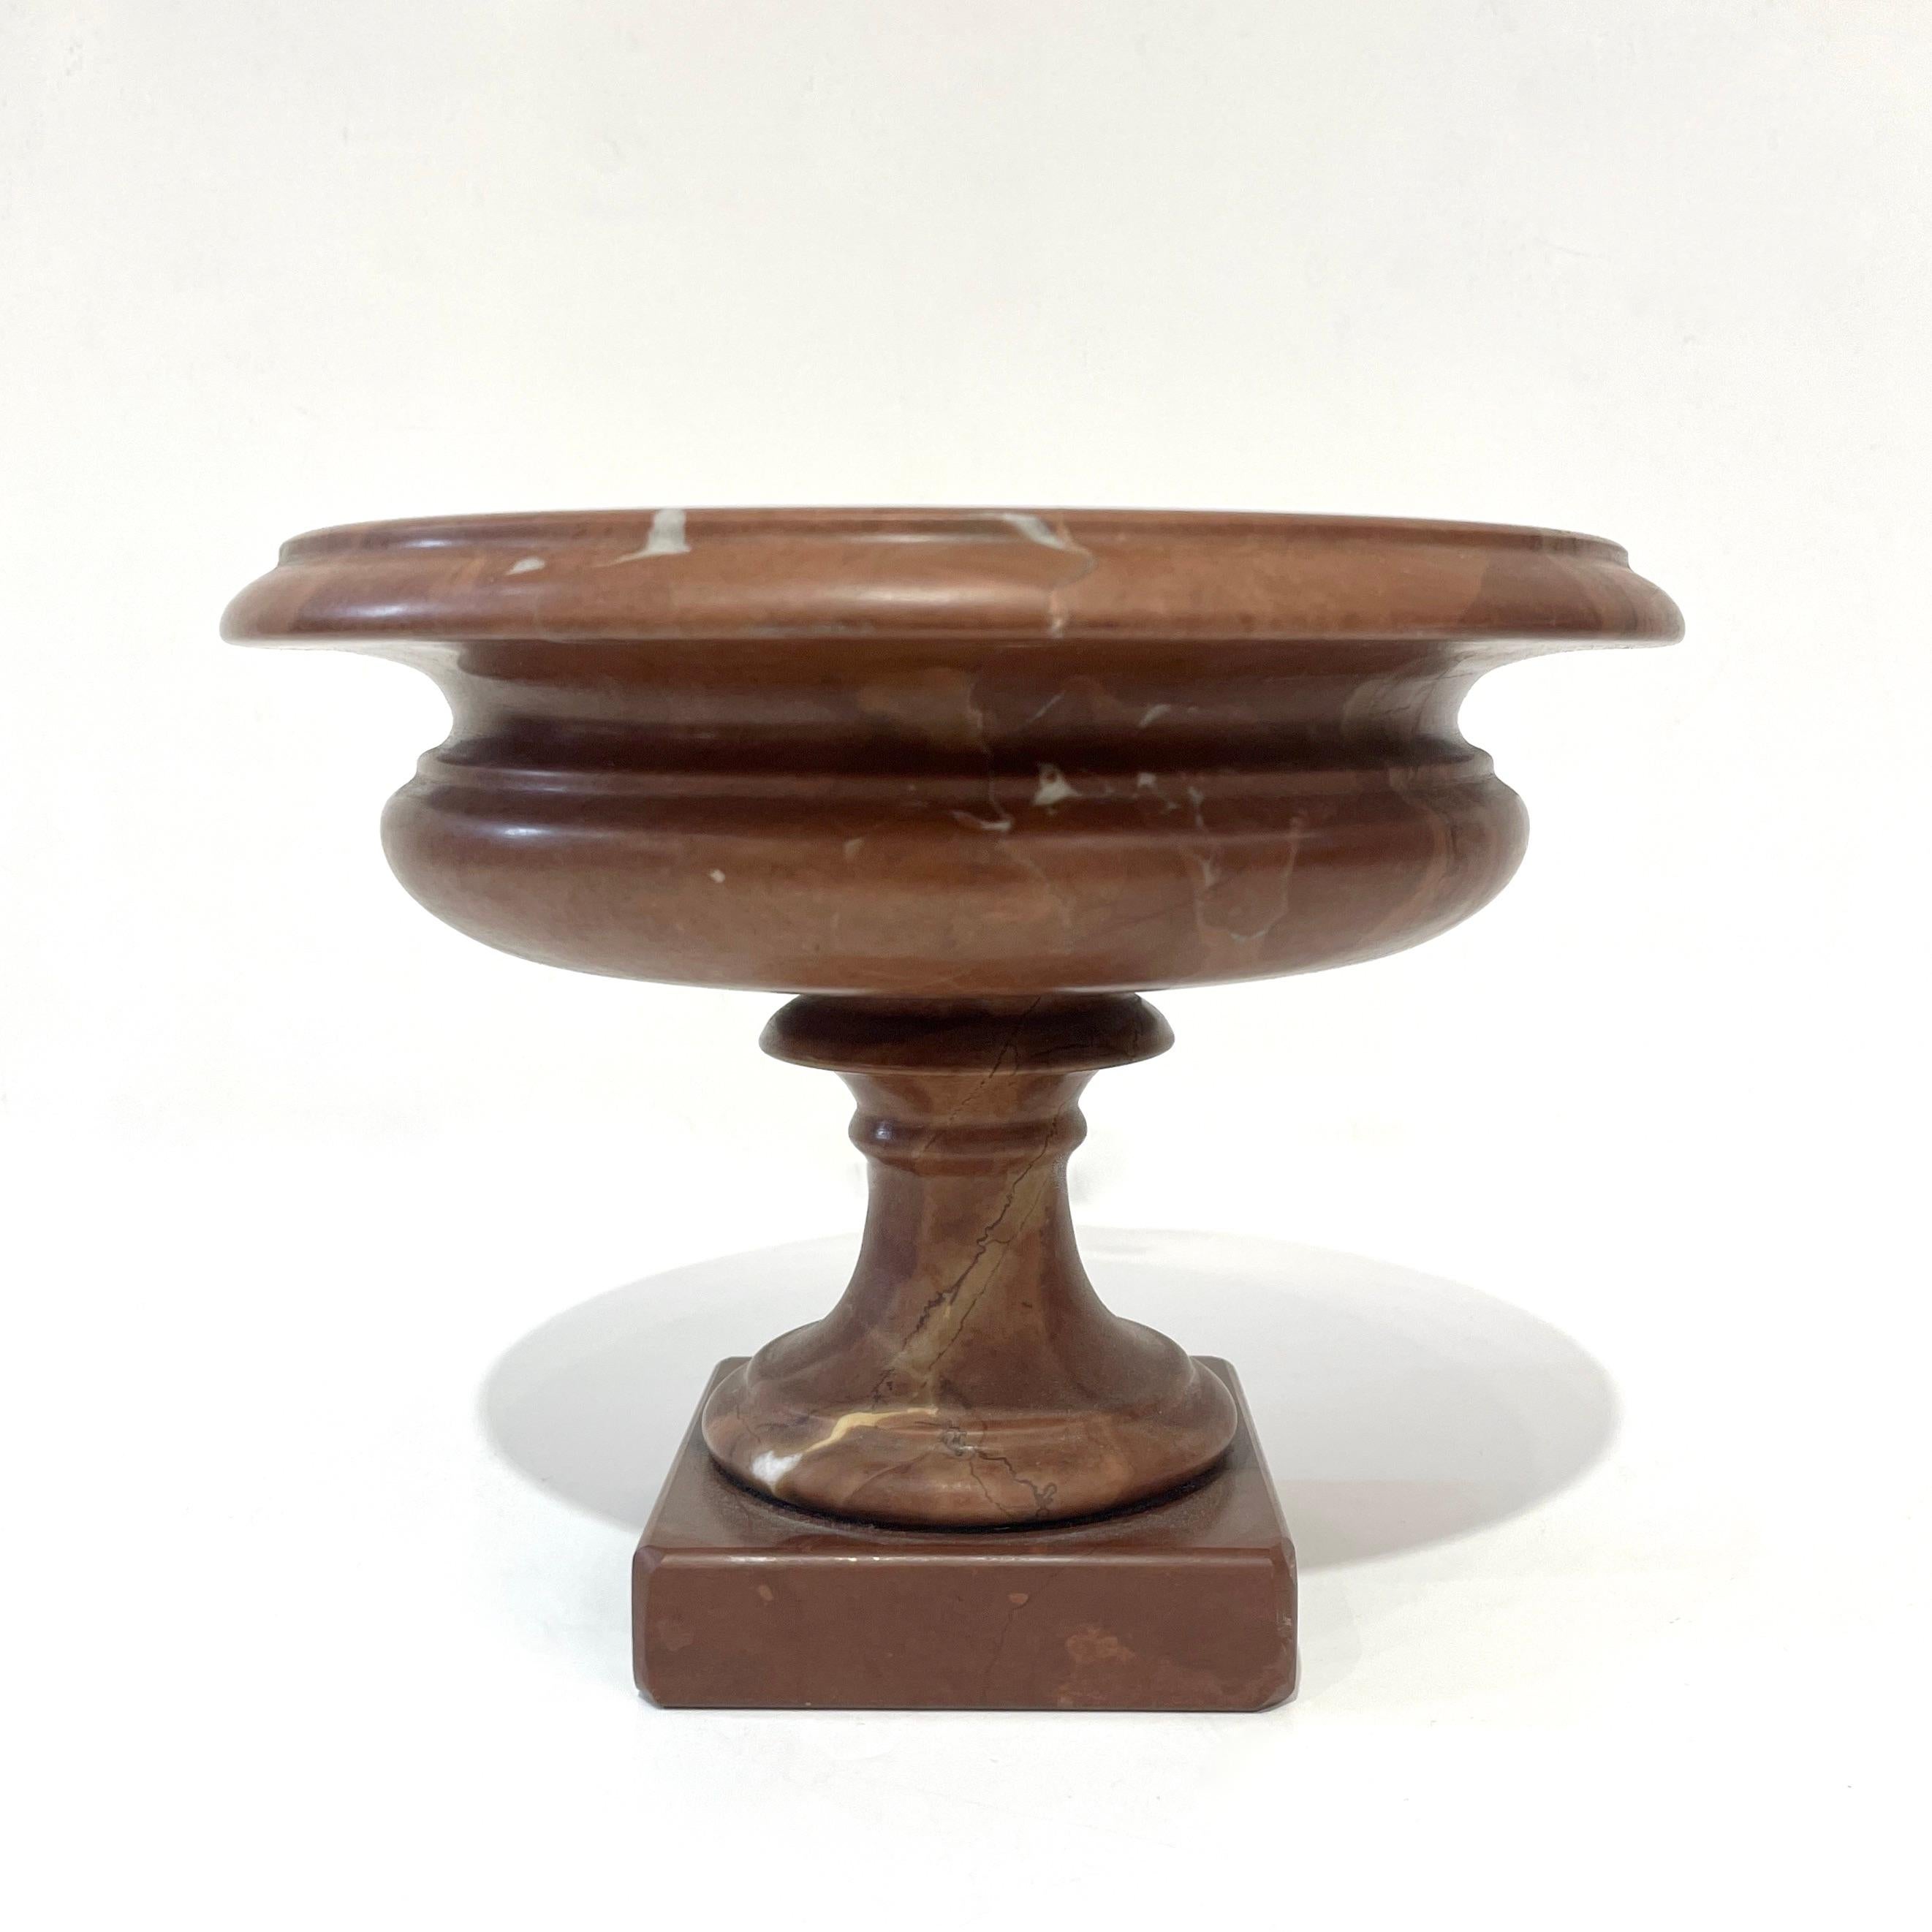 Hand-Carved 1930s Neoclassical Italian Carved Brown Red Marble Tazza Bowl with White Veins